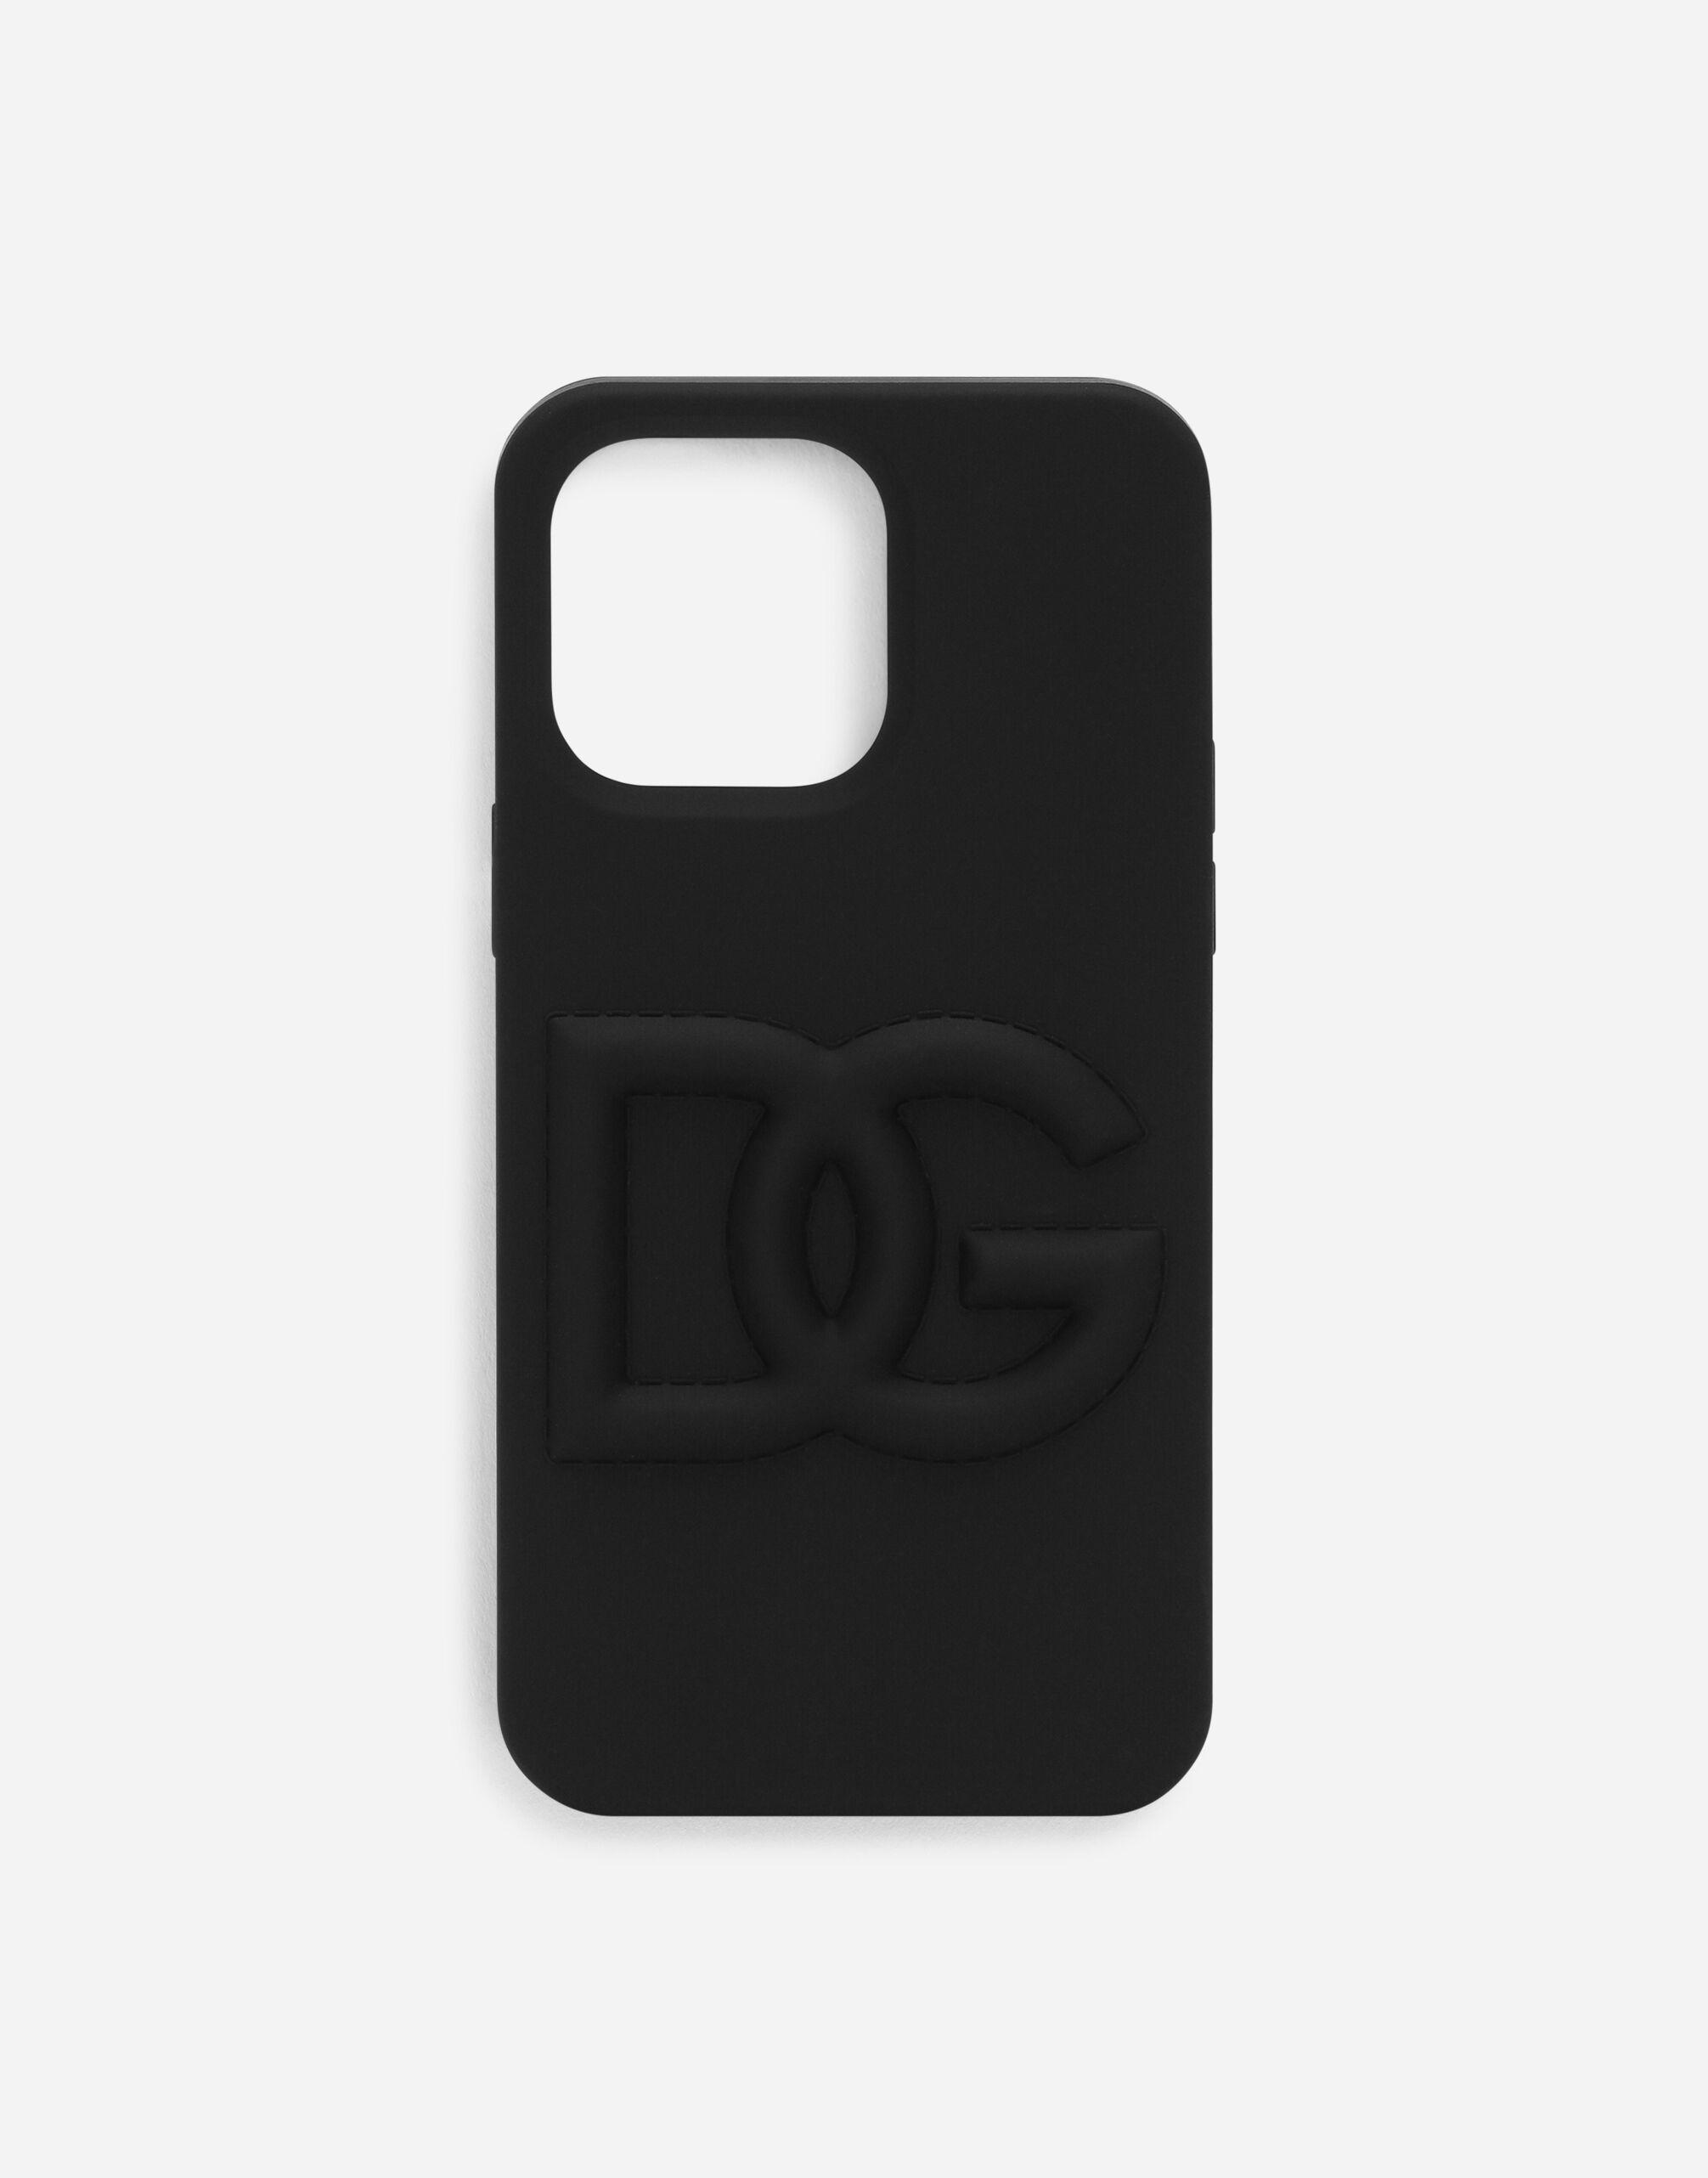 Dolce & Gabbana iPhone 14 Pro cover - ShopStyle Tech Accessories